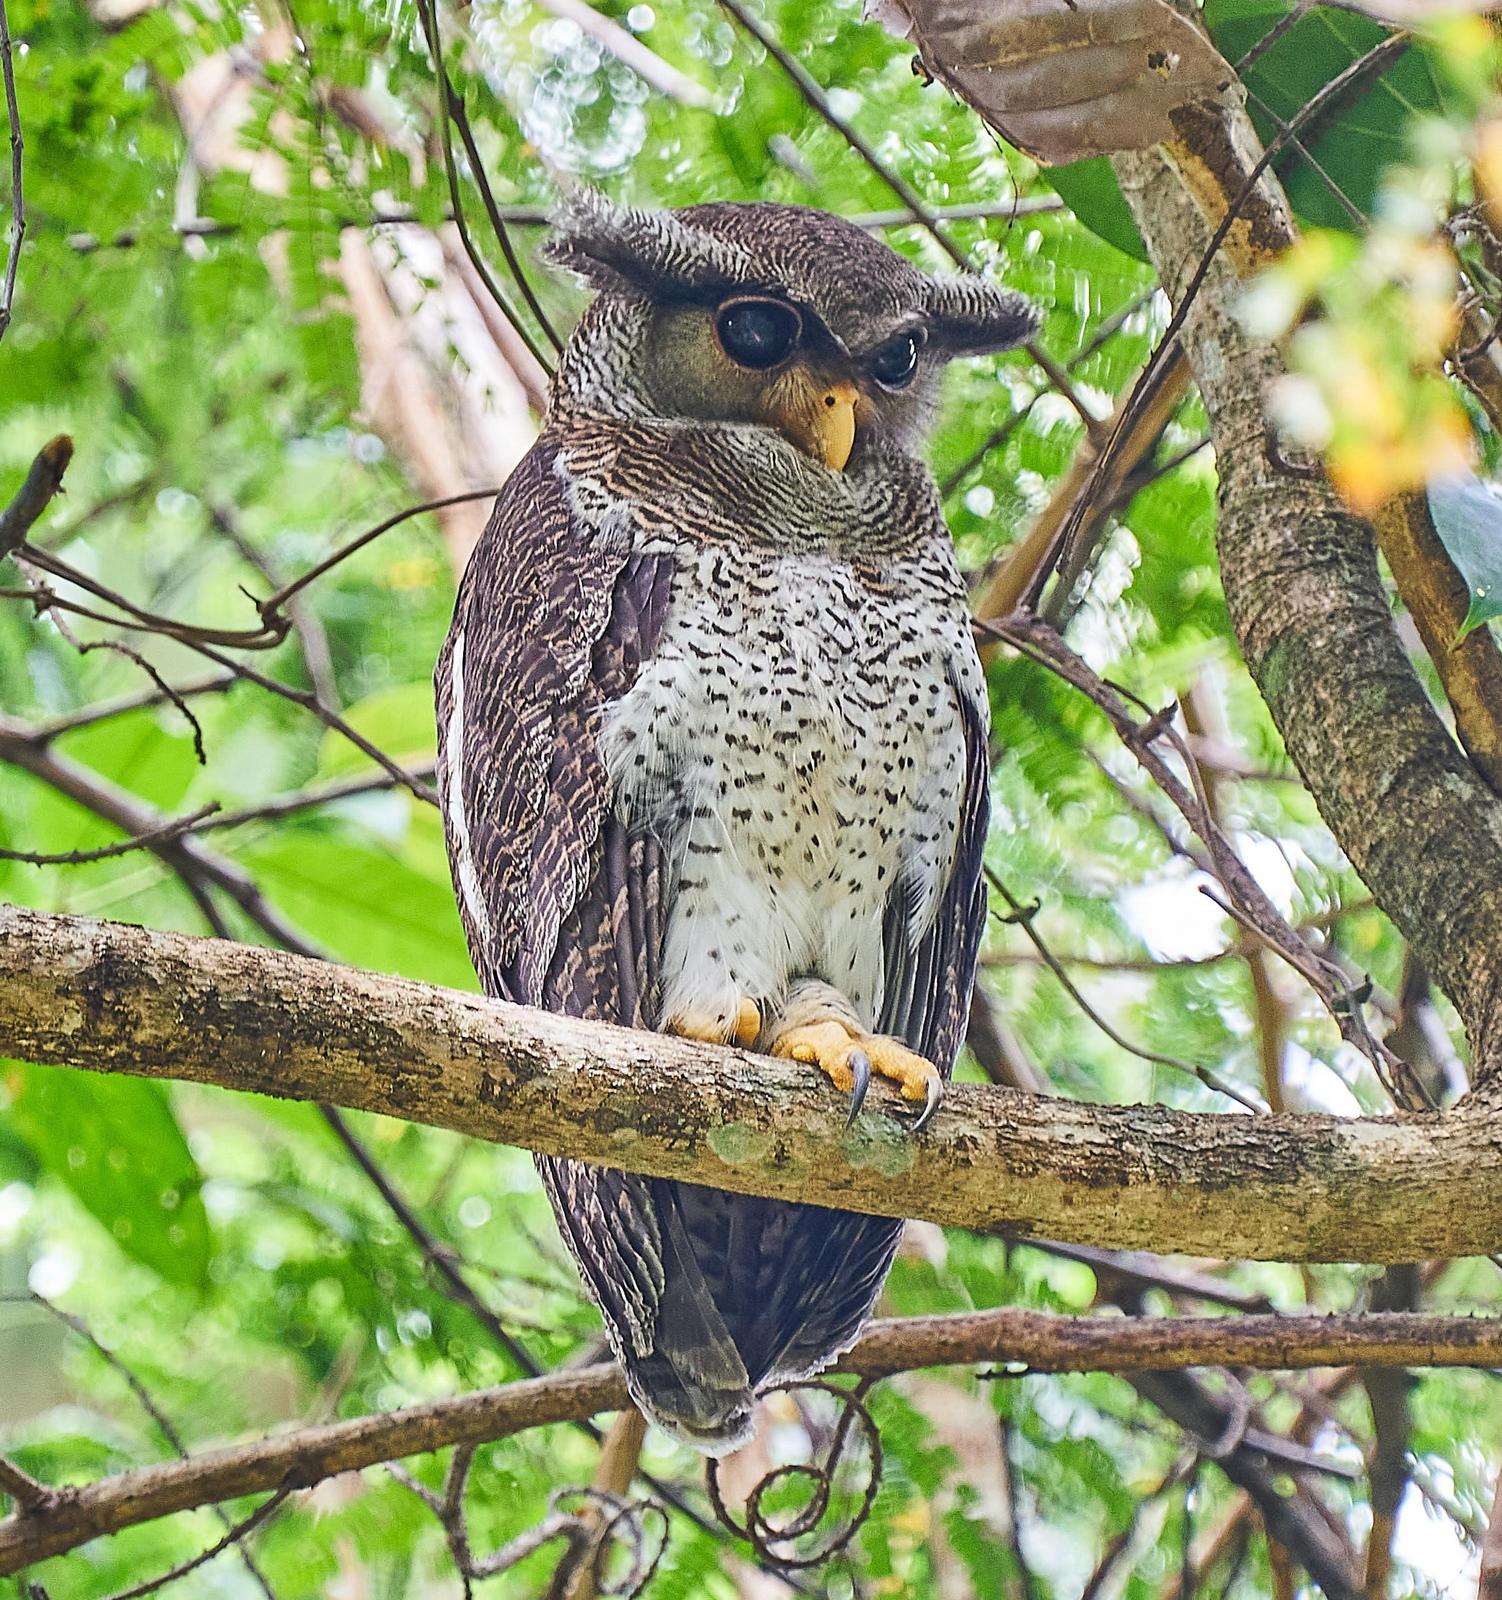 Barred Eagle-Owl Photo by Steven Cheong